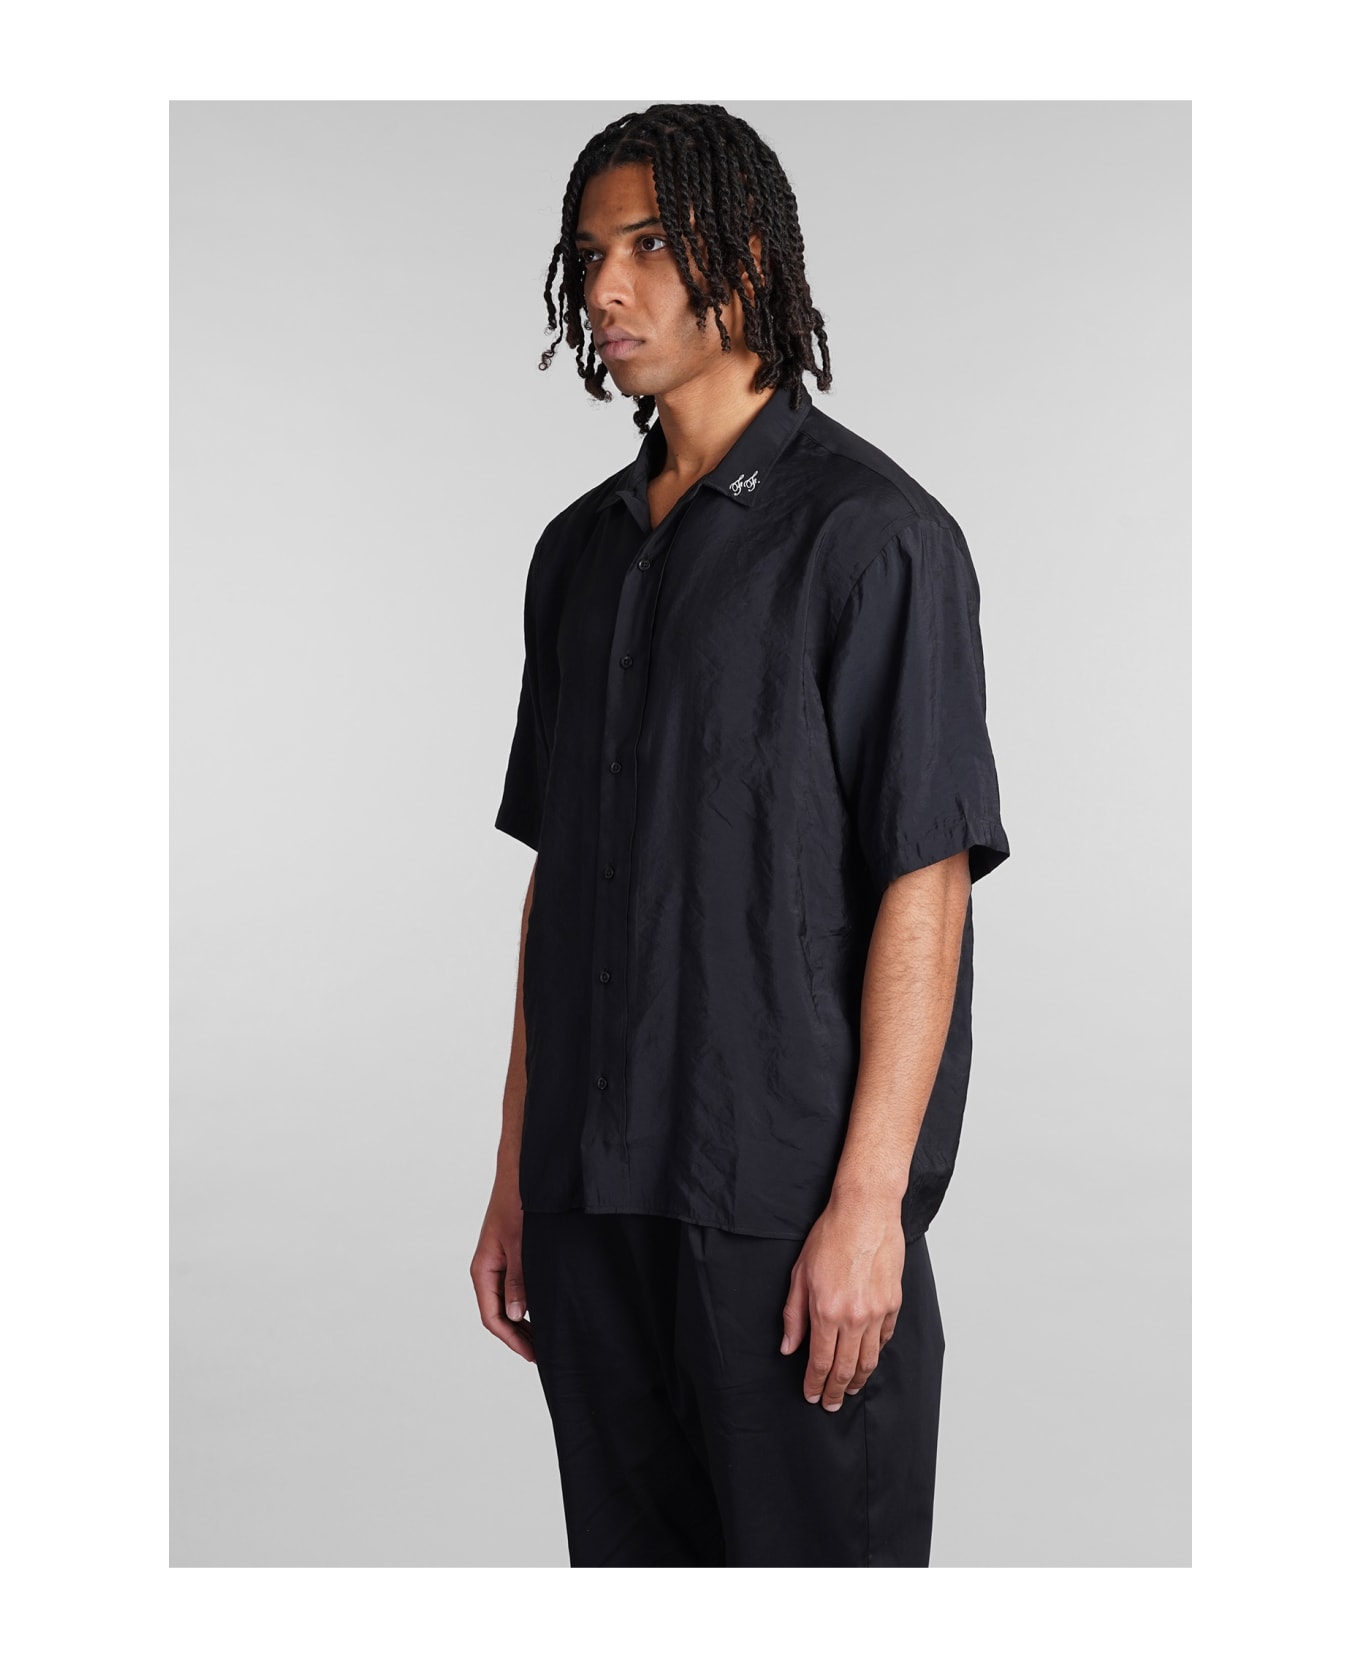 Family First Milano Shirt In Black Paper - BLACK シャツ